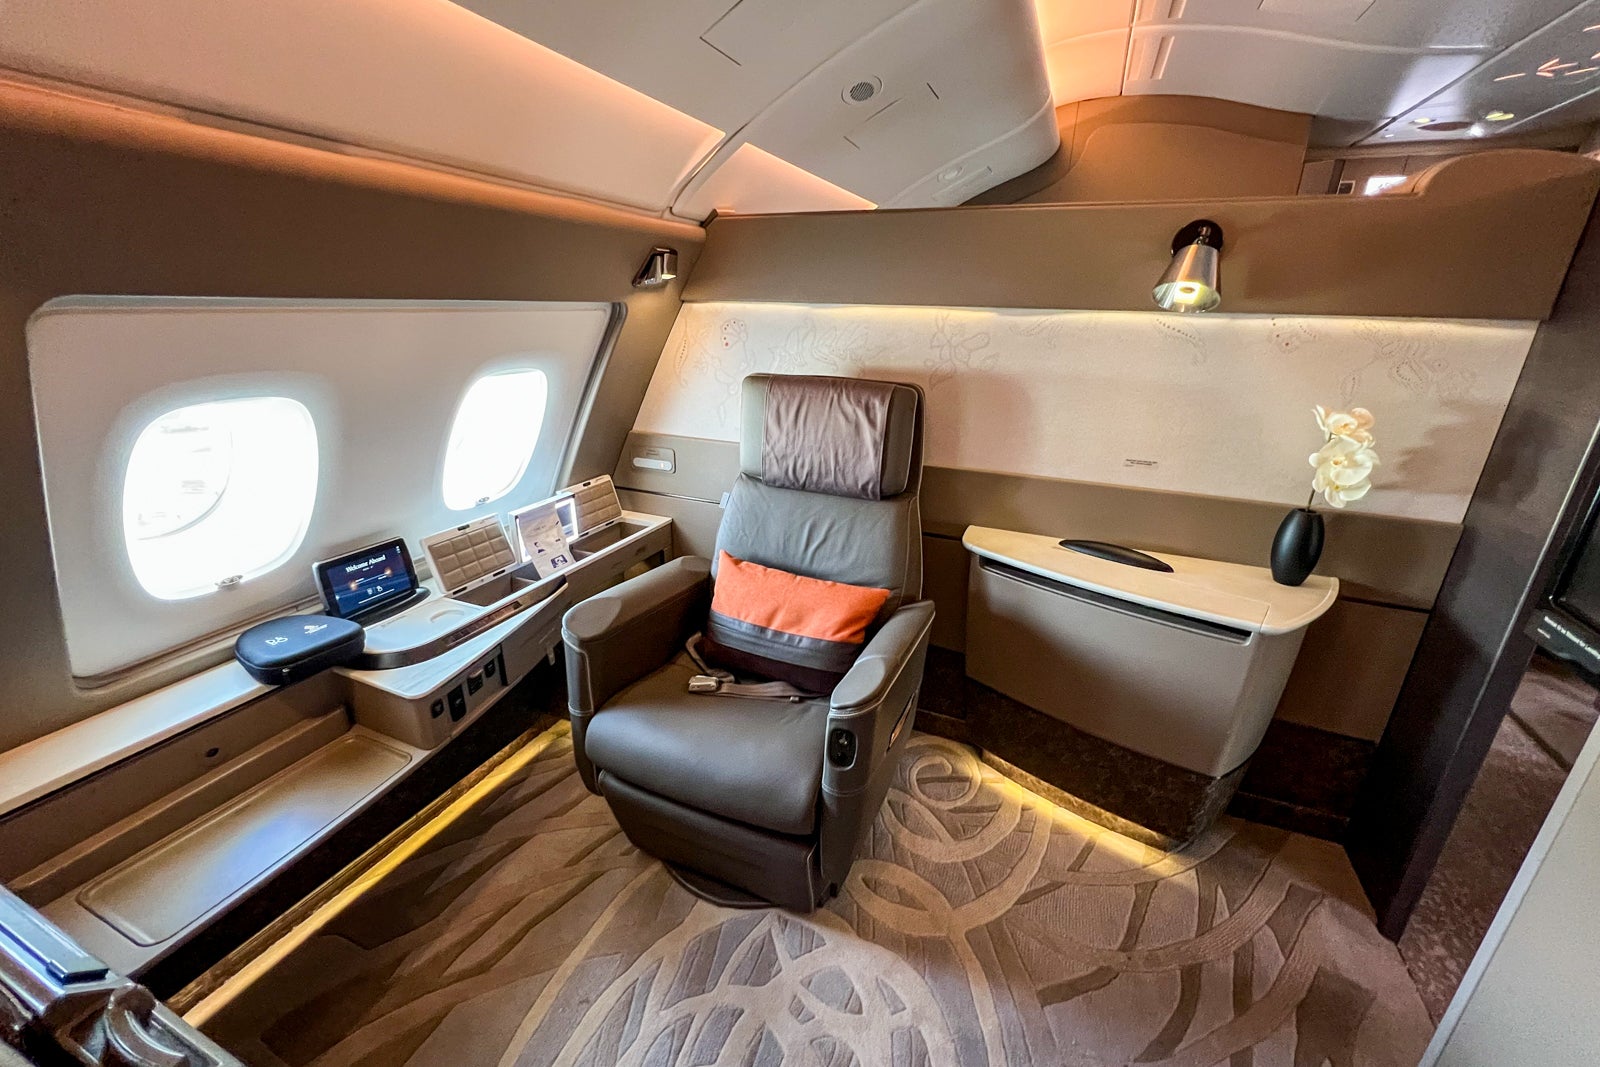 Singapore Airlines pulls Airbus A380 — and its famous Suites — from JFK